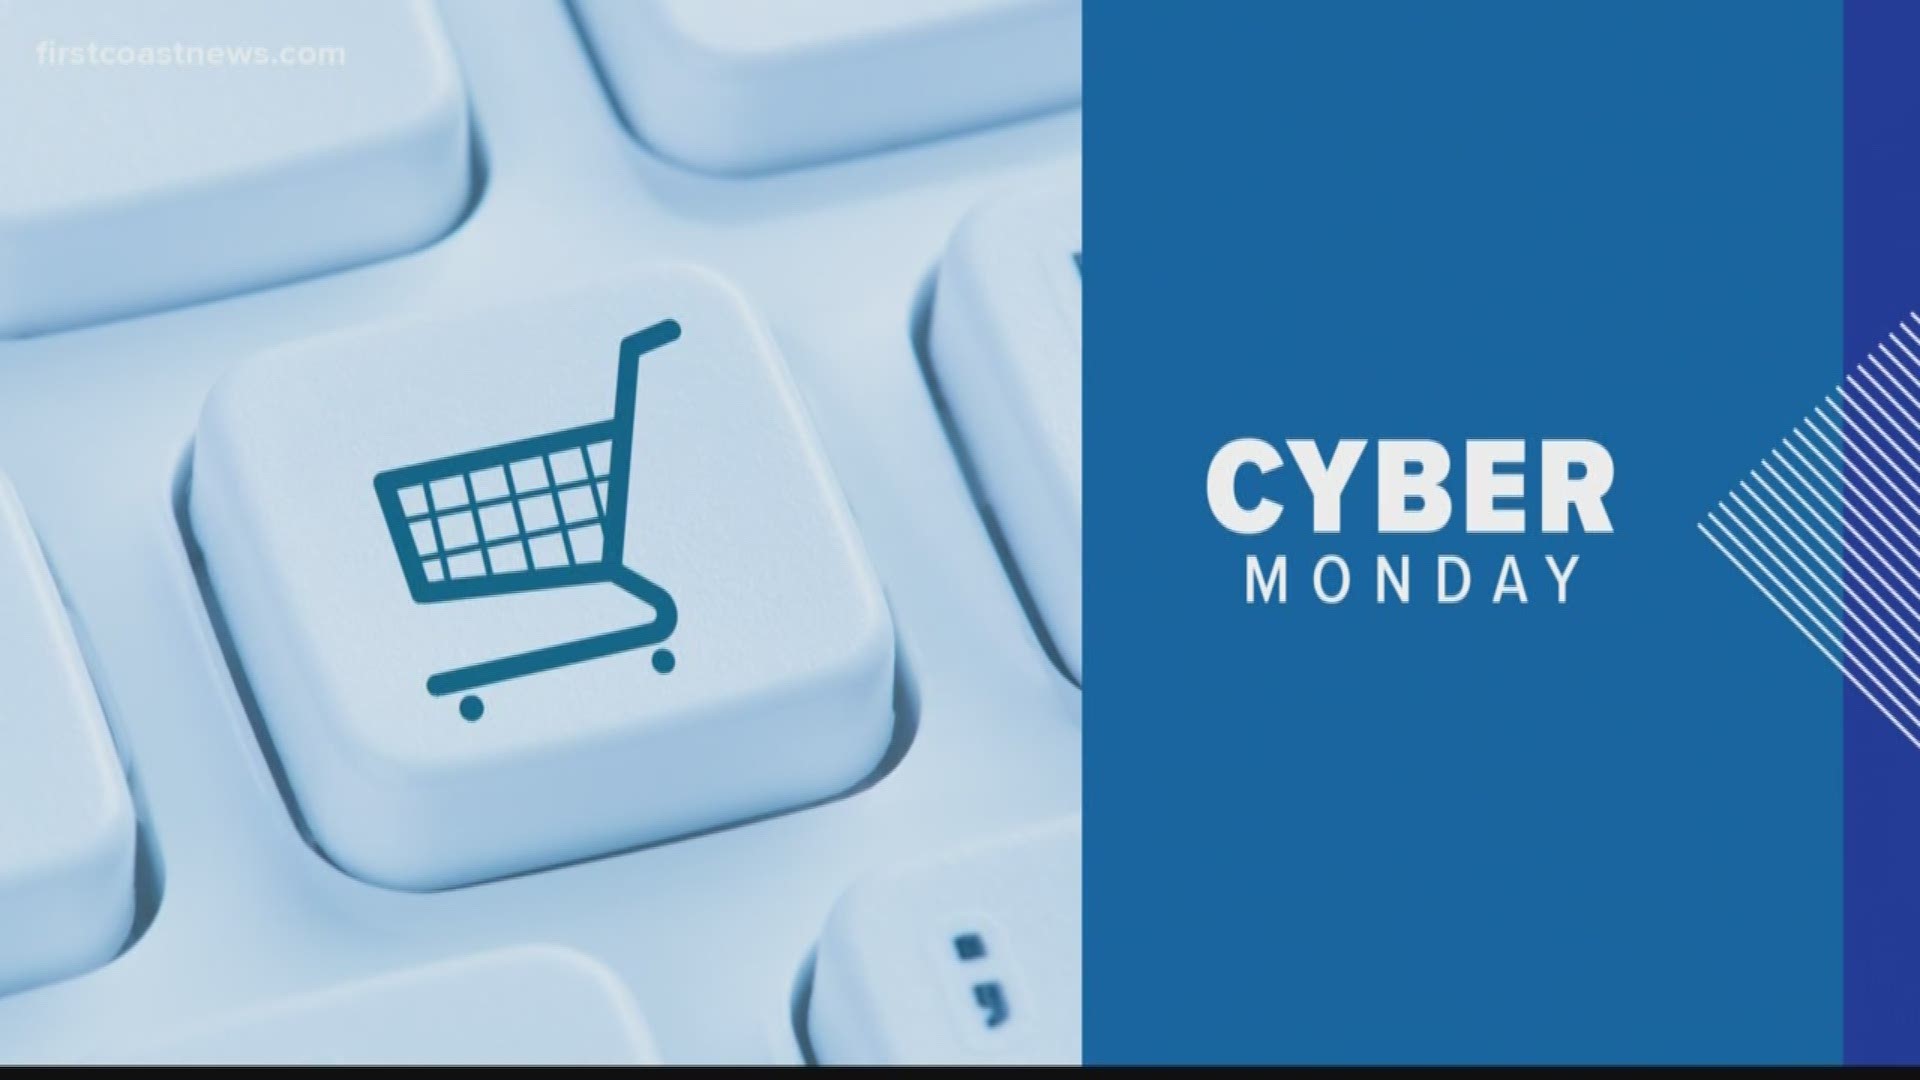 Here are some tips on how to navigate Cyber Monday deals.